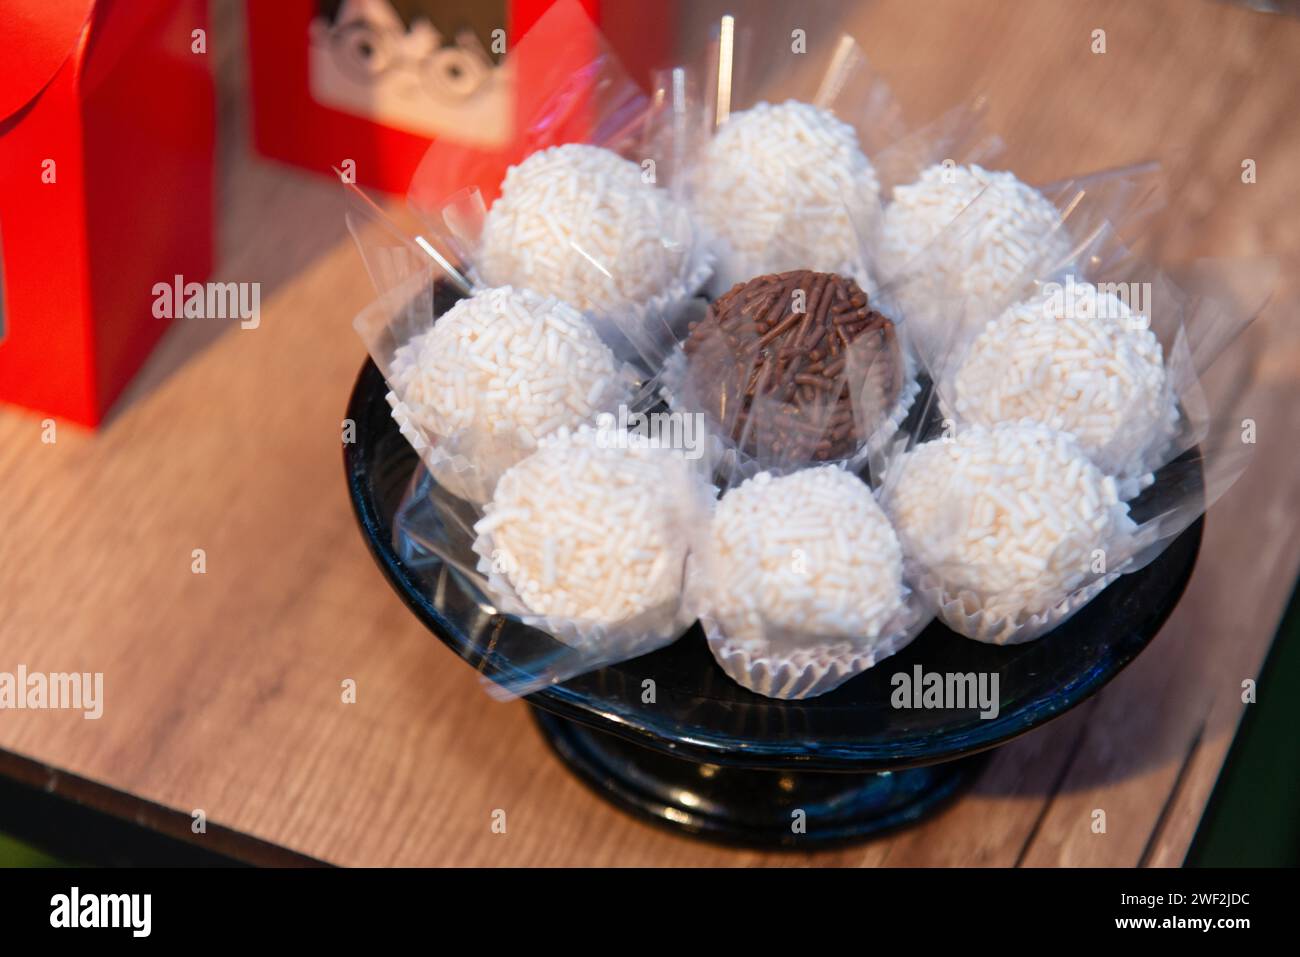 A delicious assortment of cake pops and candy bars fills this dessert dish Stock Photo